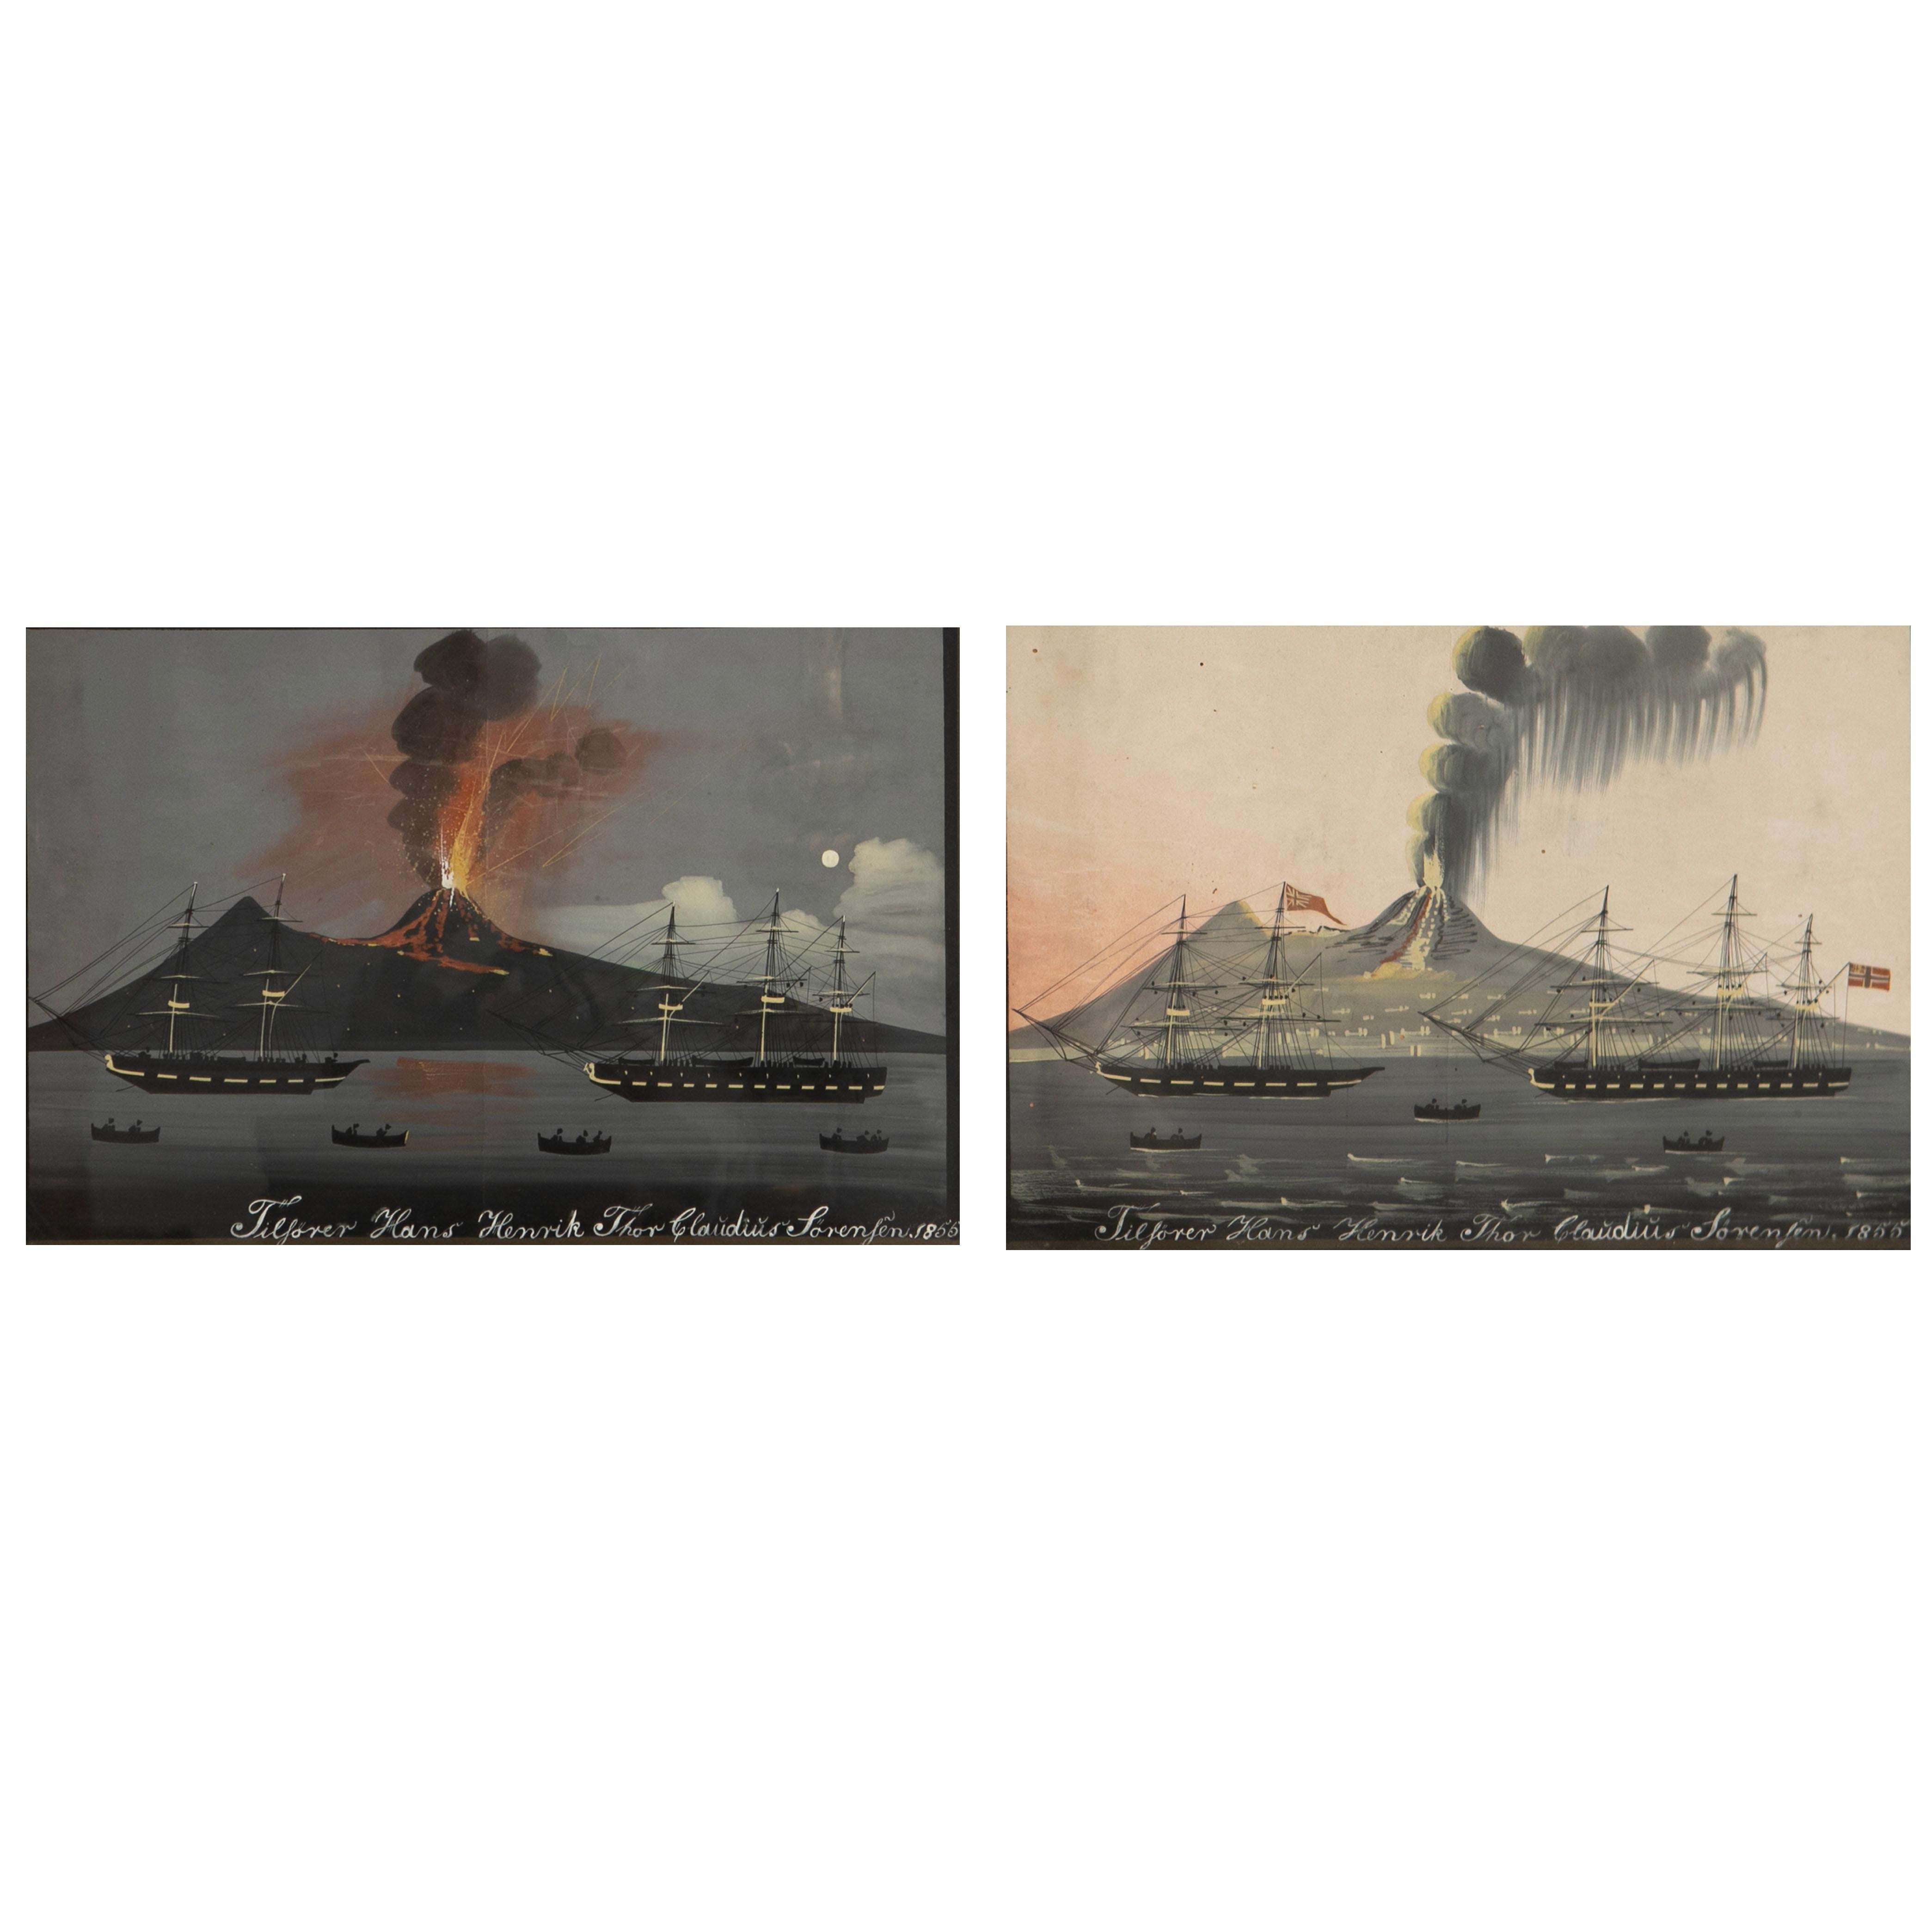 A decorative pair of Italian 19th Century gouache paintings of sailors on the Bay of Naples before Vesuvius erupting by day, and another by night, dated 1855.

Framed in a frame from the same period, 56 x 73 cm.
Sheet: 40 x 58 cm

Done as